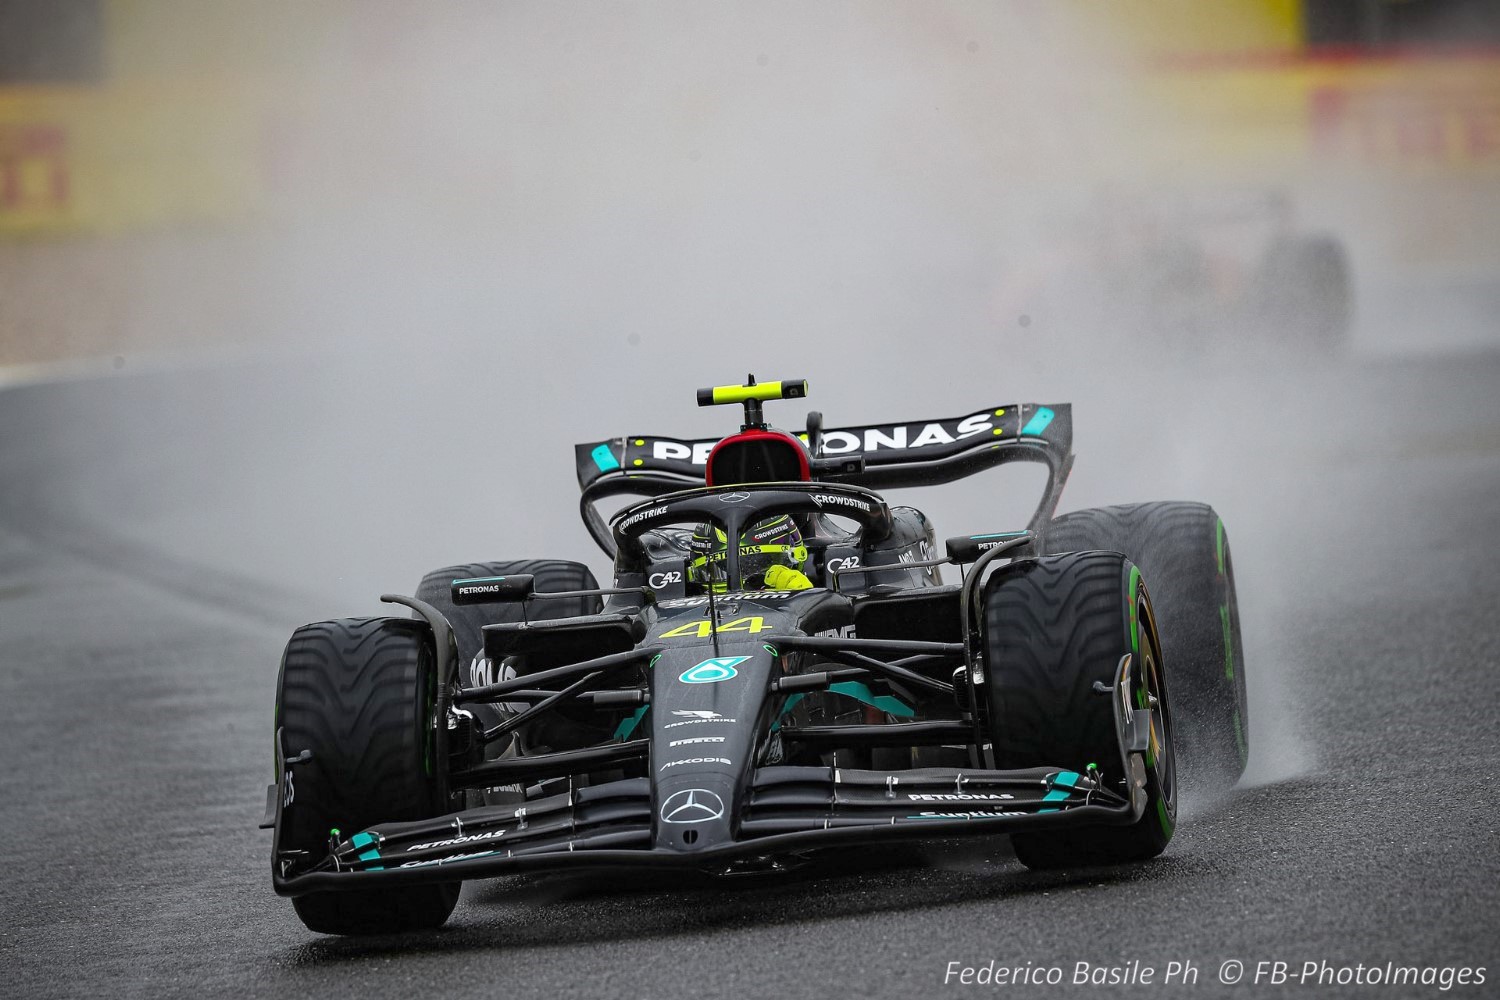 #44 Lewis Hamilton, (GRB) AMG Mercedes Ineos during the Belgian GP, Spa-Francorchamps 27-30 July 2023 Formula 1 World championship 2023.